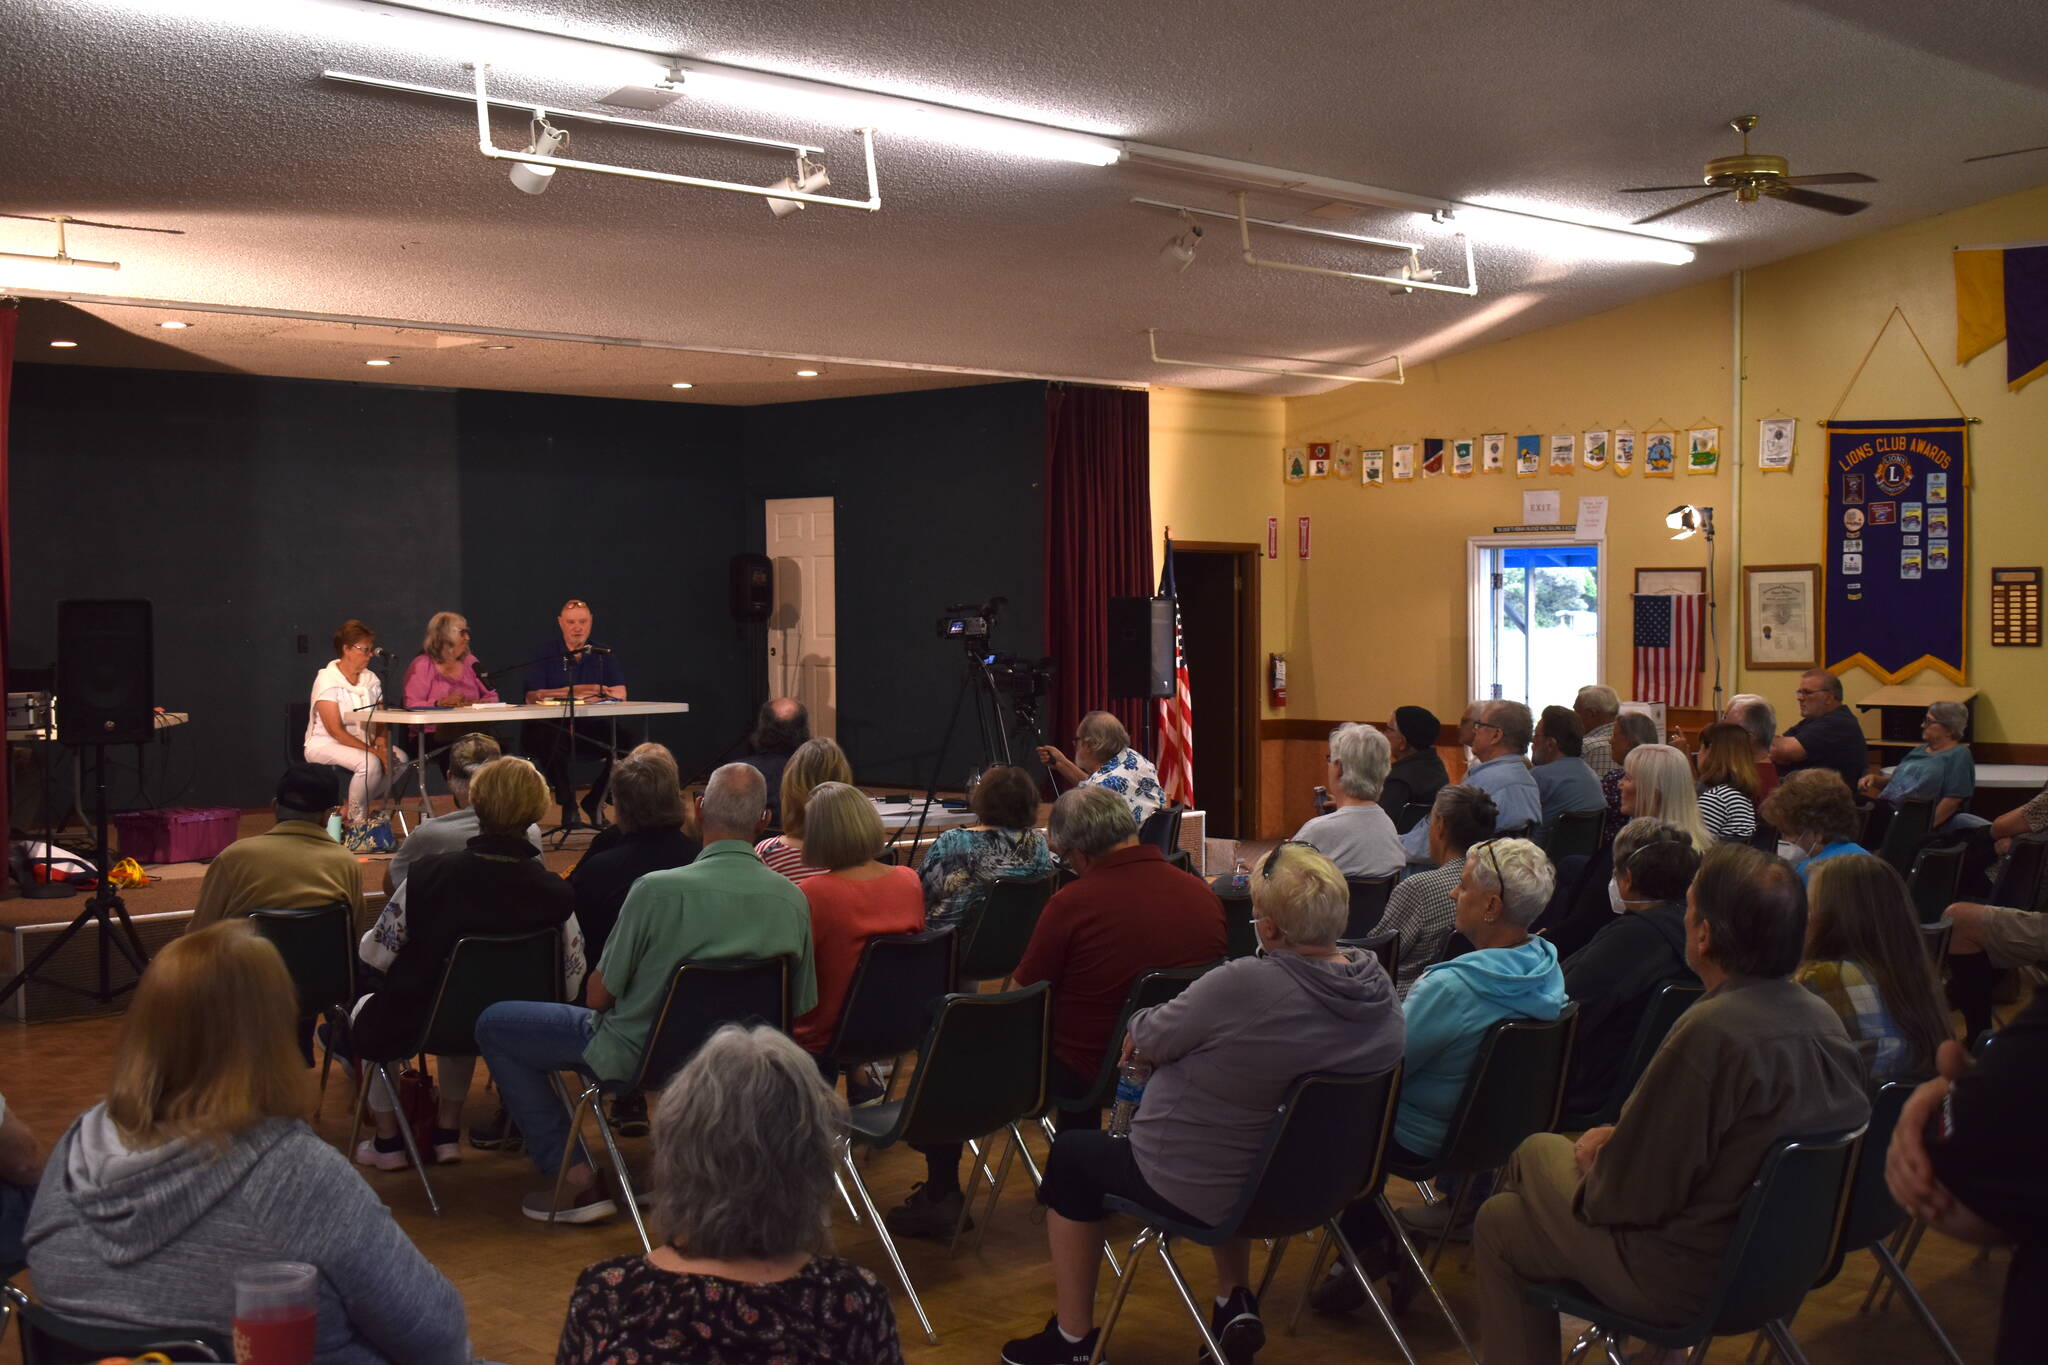 Clayton Franke / The Daily World
About 70 people attended a forum for candidates of Ocean Shores City Council Position 6 on Wednesday, Aug. 30 at the Ocean Shores Lions Club.